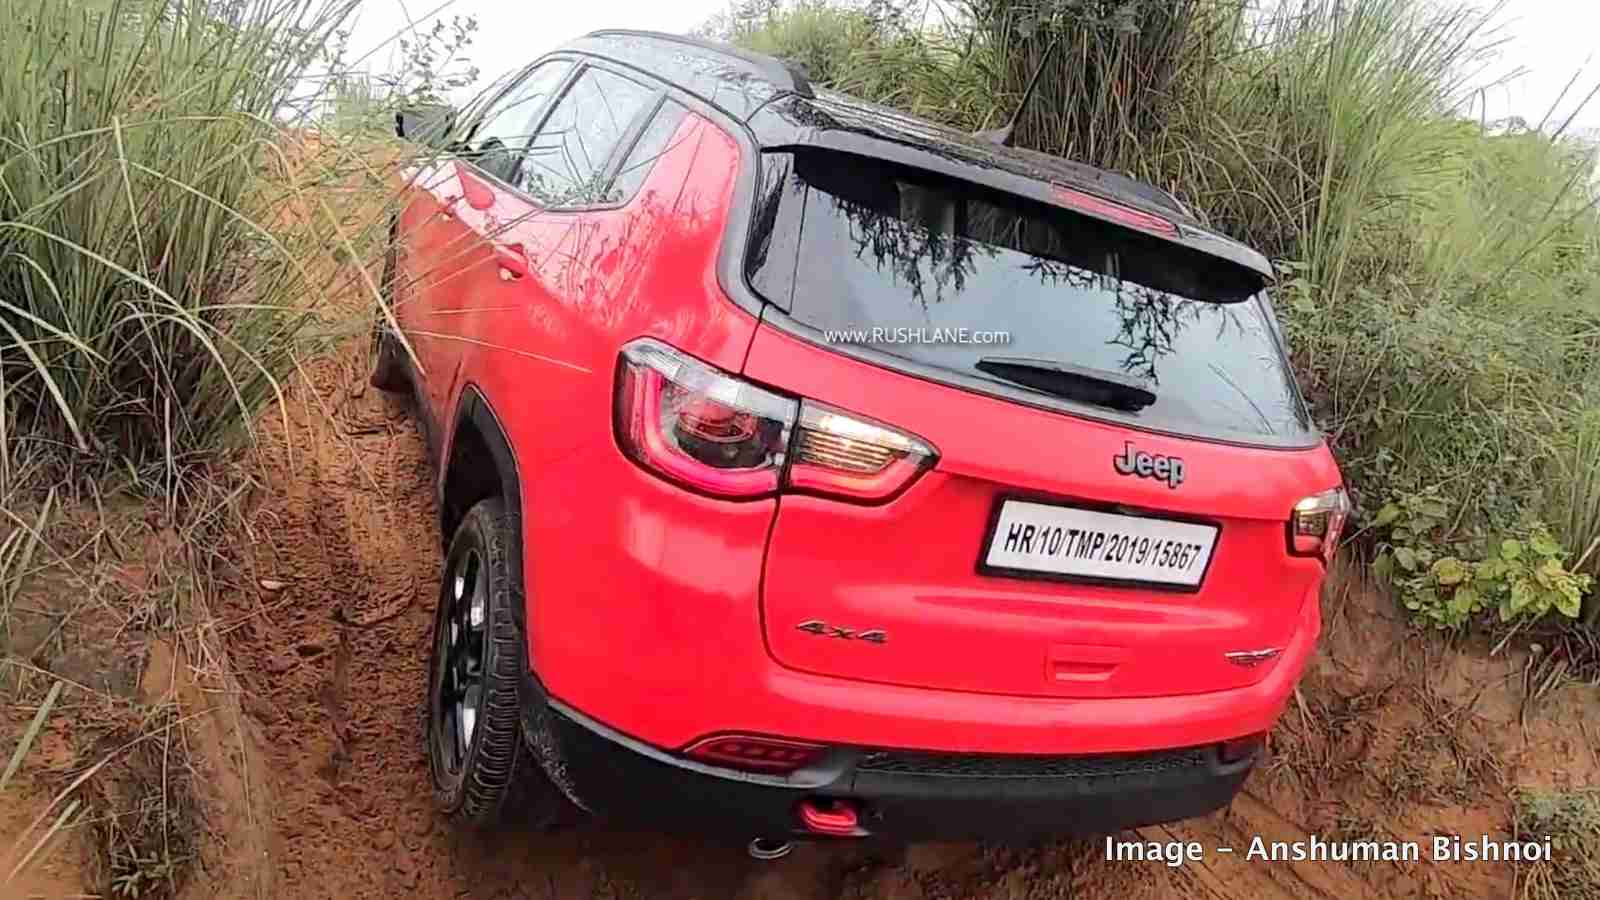 Jeep Compass trailhawk off-road